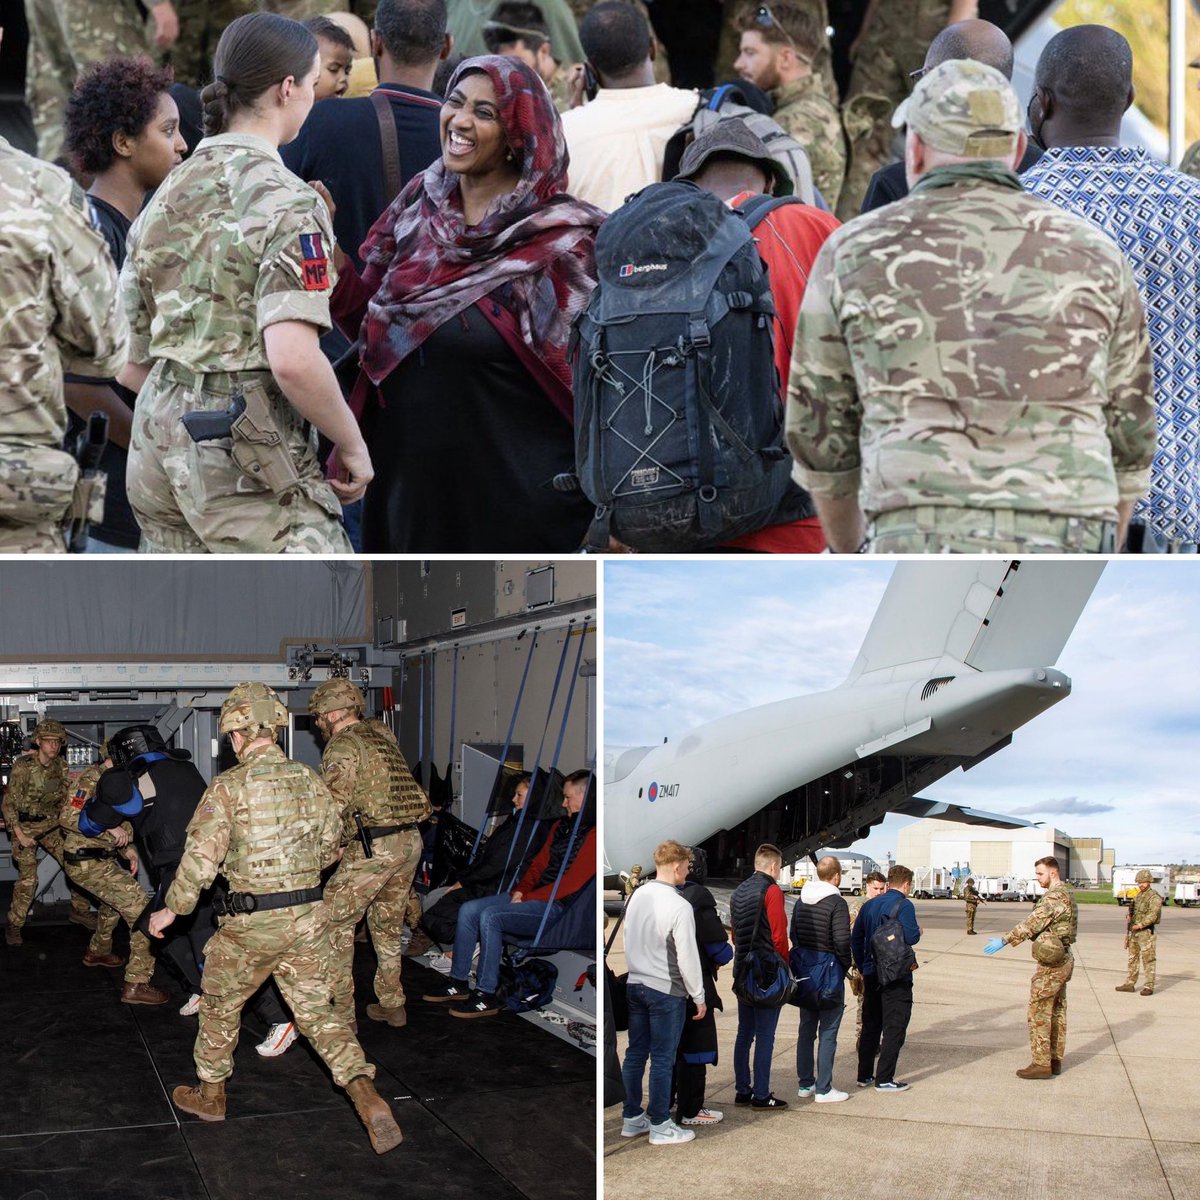 A great visit to 1 Tactical Police & Security Sqn @RAF__Police @RAFBrizeNorton Operating globally everyday with @AirMobilityRAF , the team provide protection for our aircraft and those travelling on them, as seen last year during the evacuation of British Citizens from Sudan.